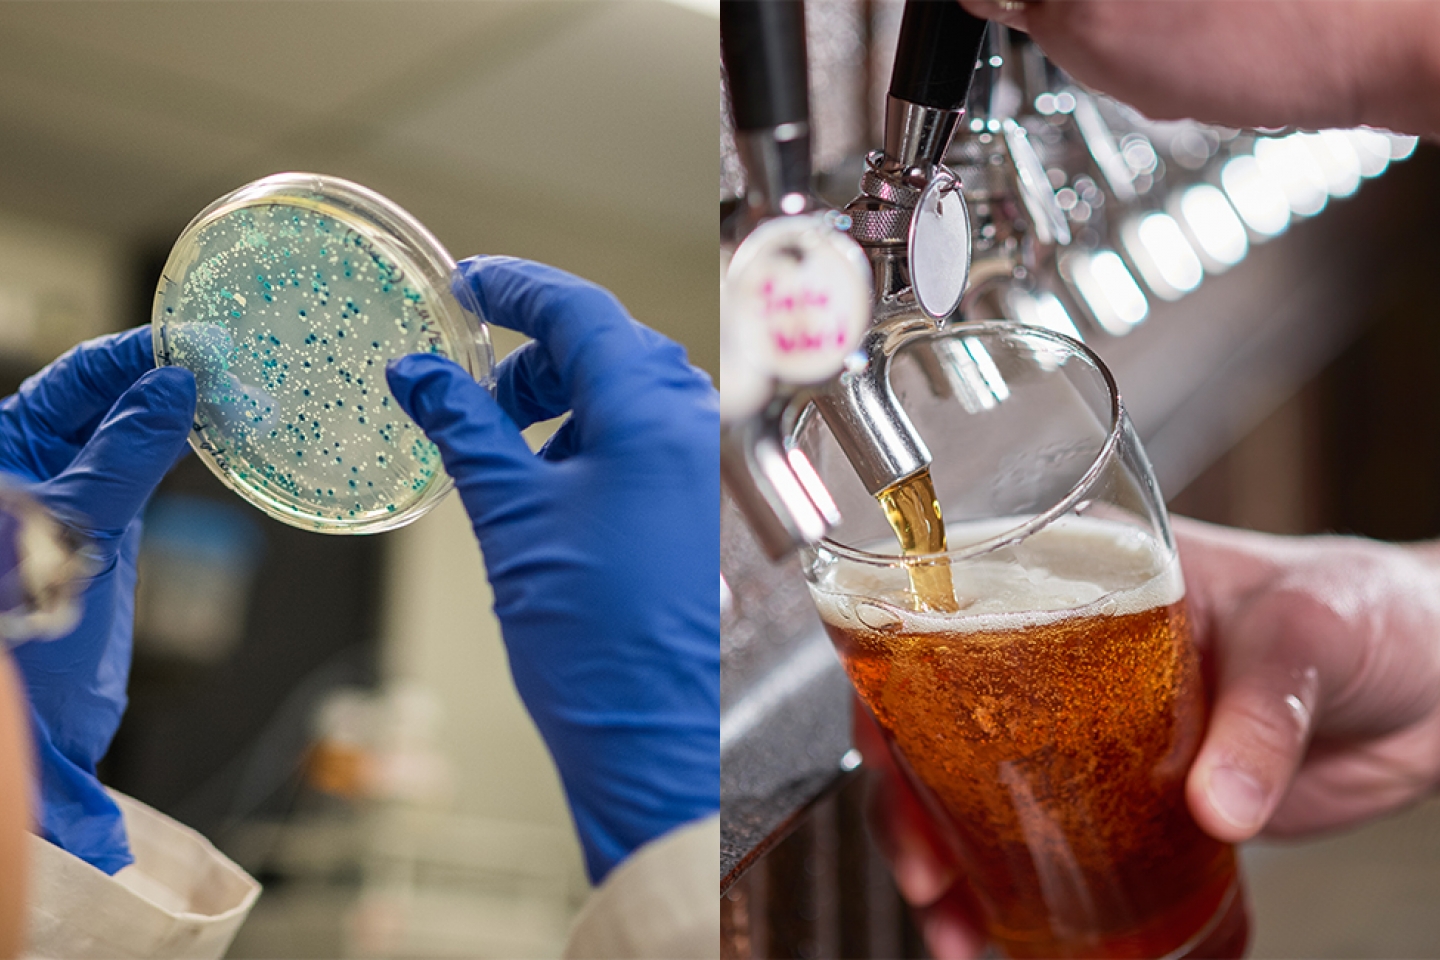 A scientist examines bacteria and a bartender pours beer.